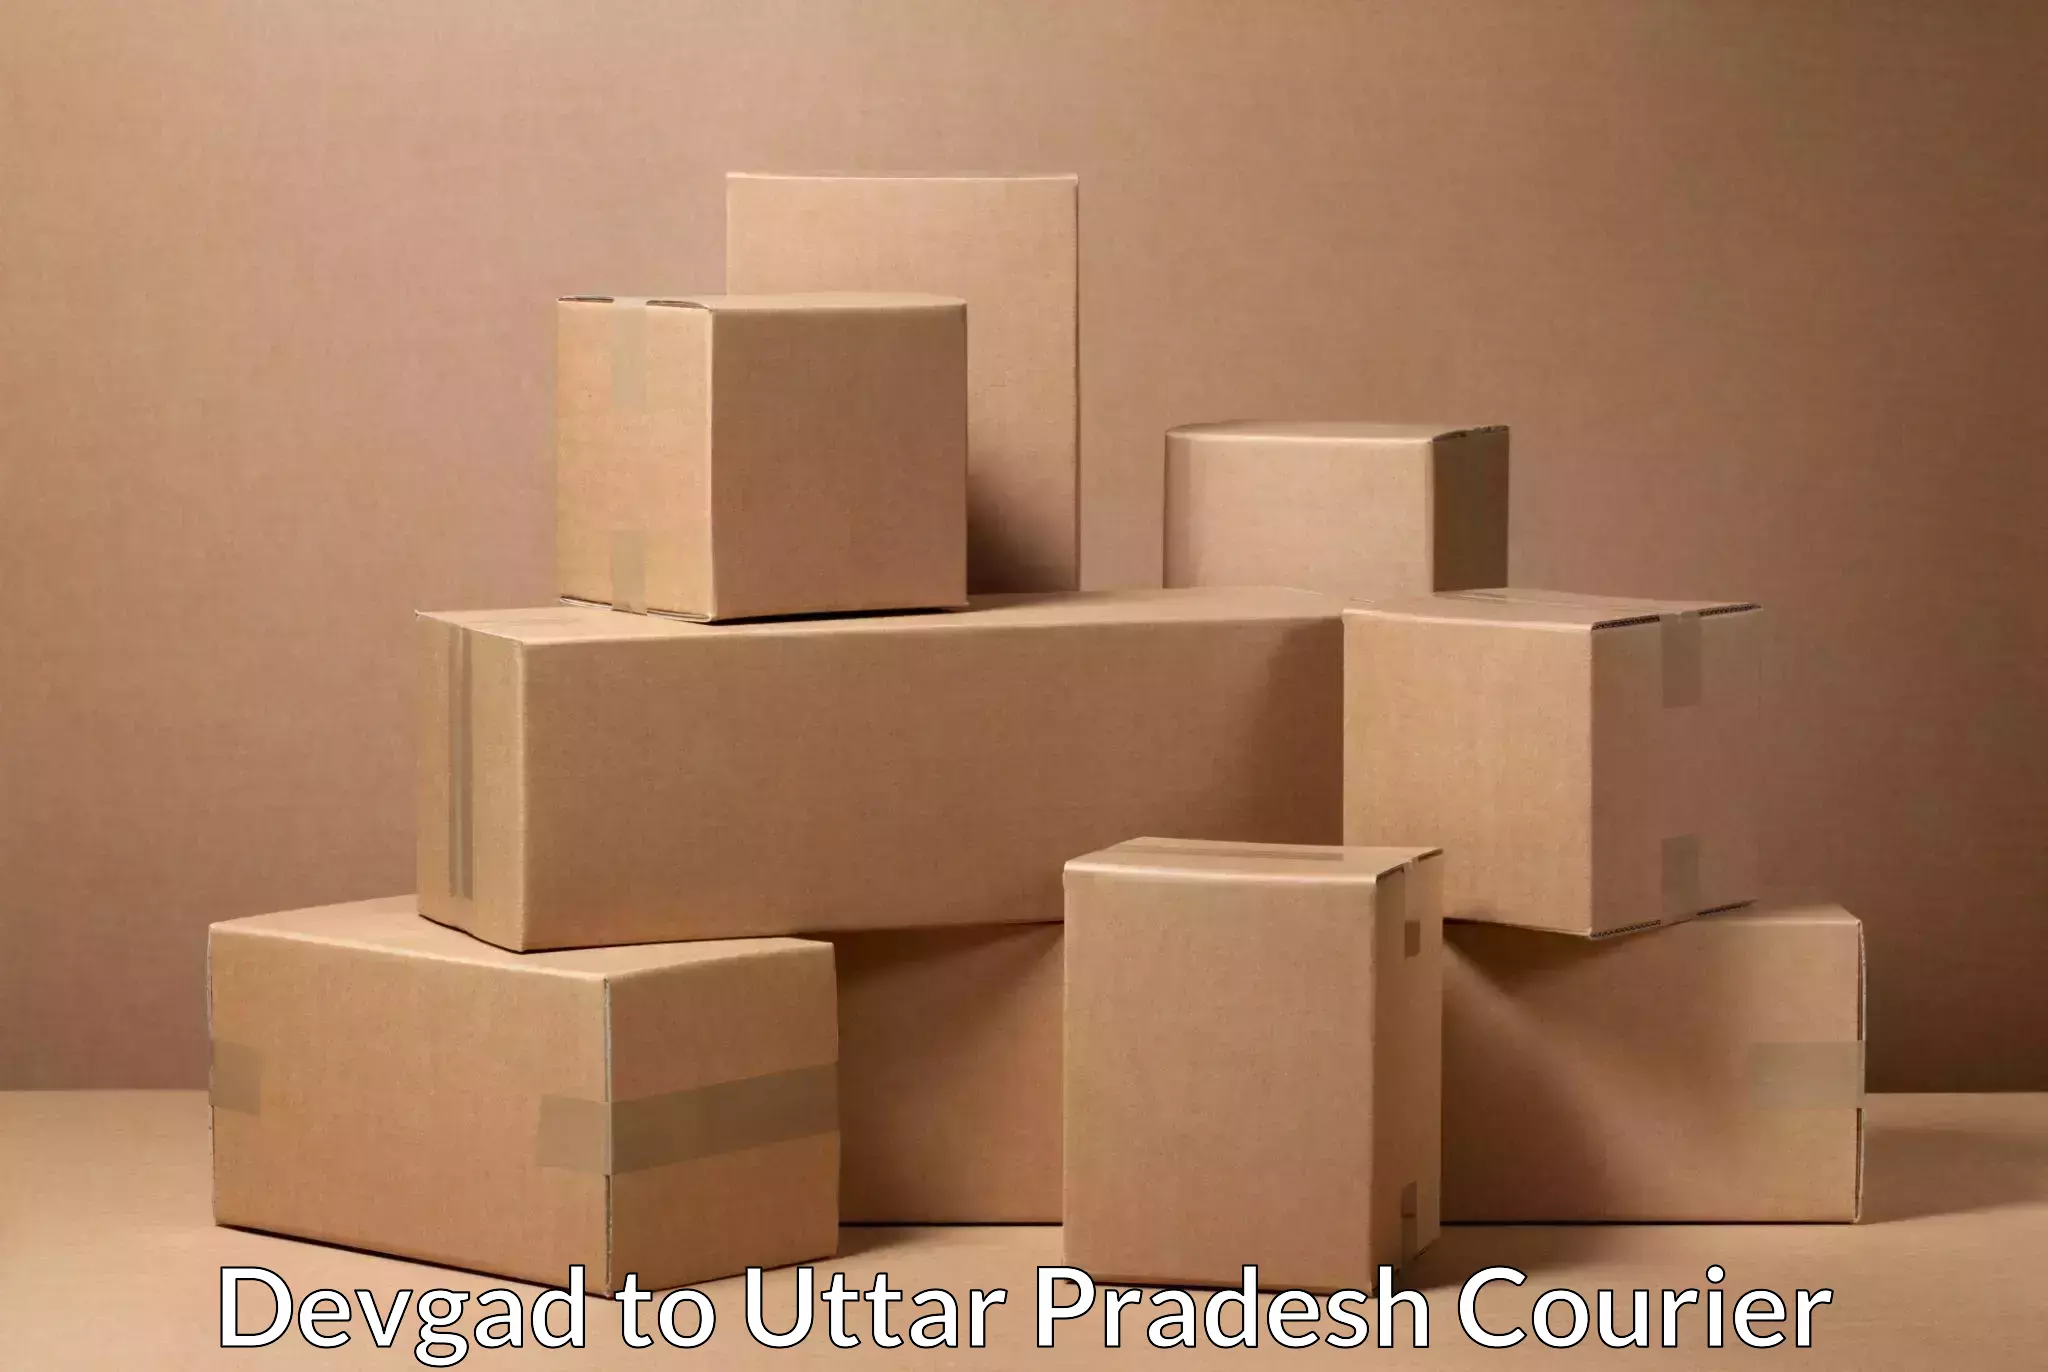 Business shipping needs Devgad to Aligarh